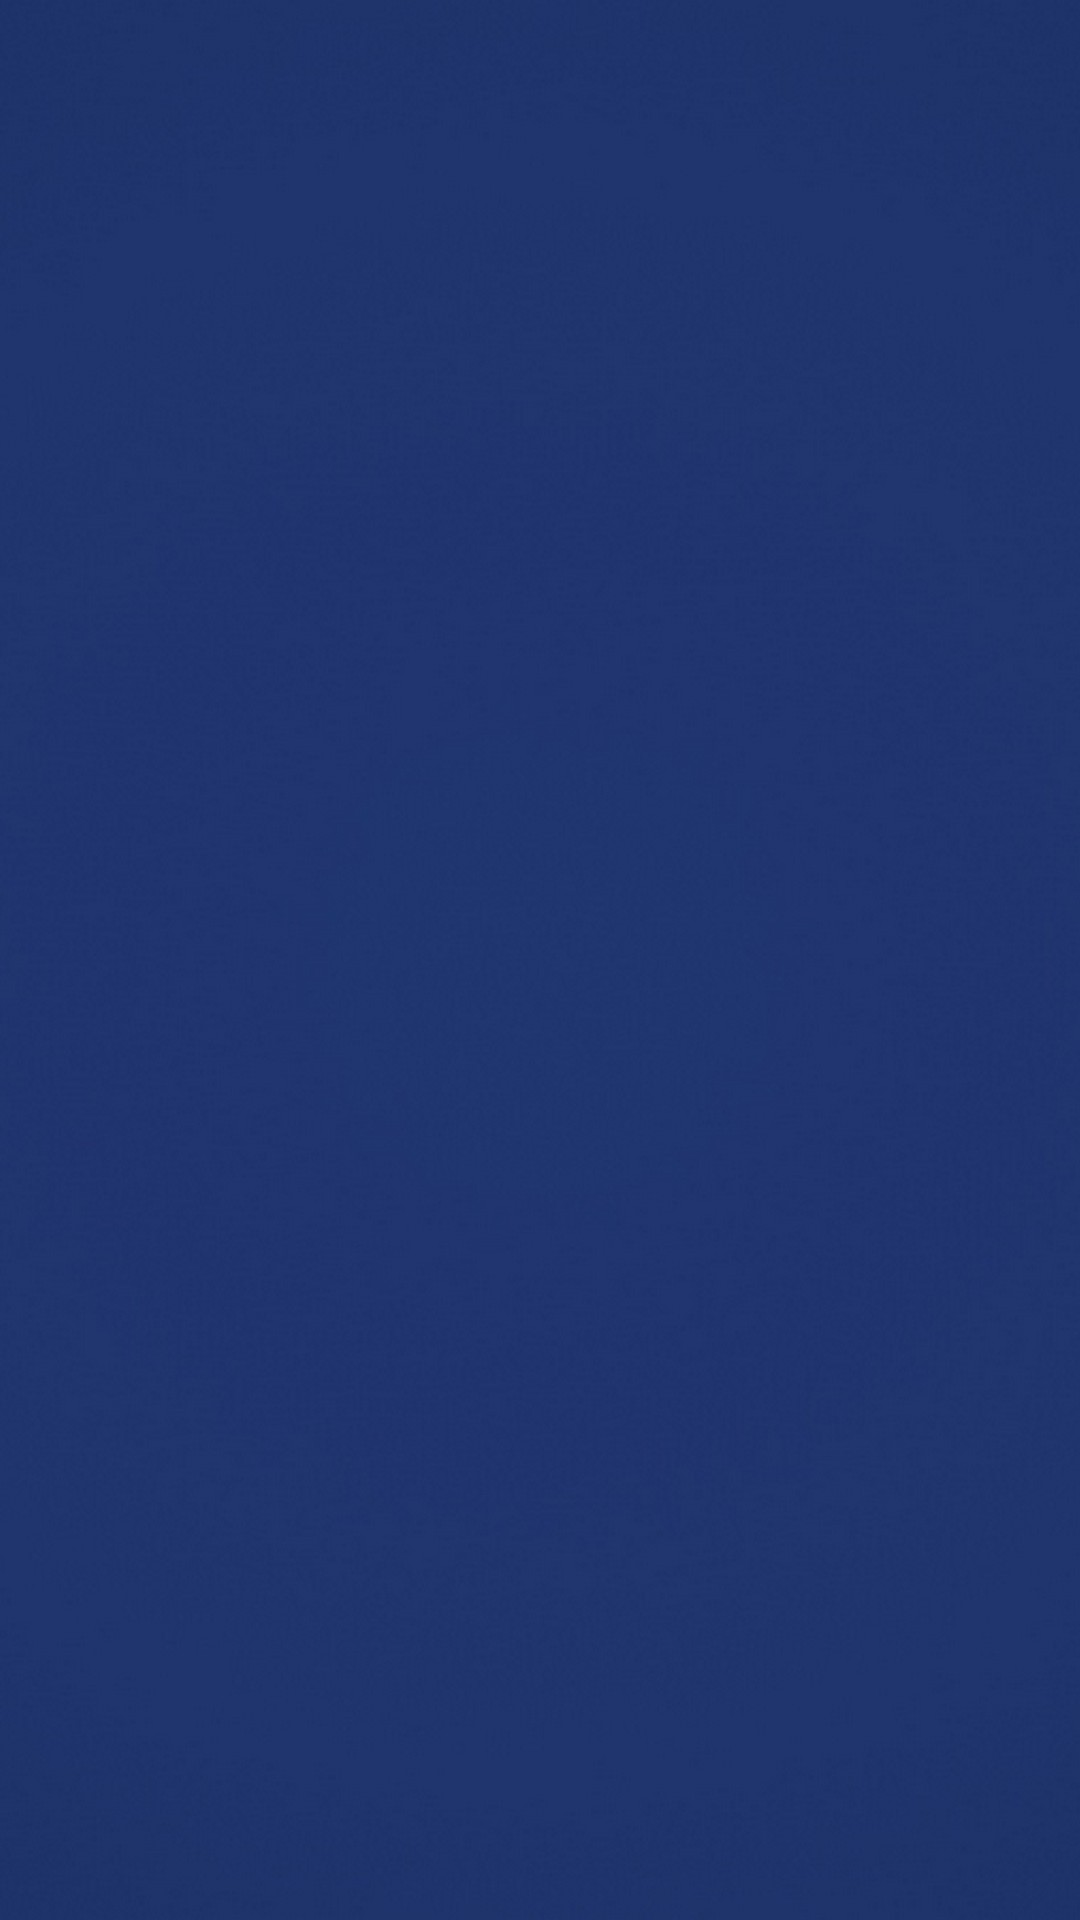 Blue Wallpaper Android With high-resolution 1080X1920 pixel. You can use this wallpaper for your Android backgrounds, Tablet, Samsung Screensavers, Mobile Phone Lock Screen and another Smartphones device